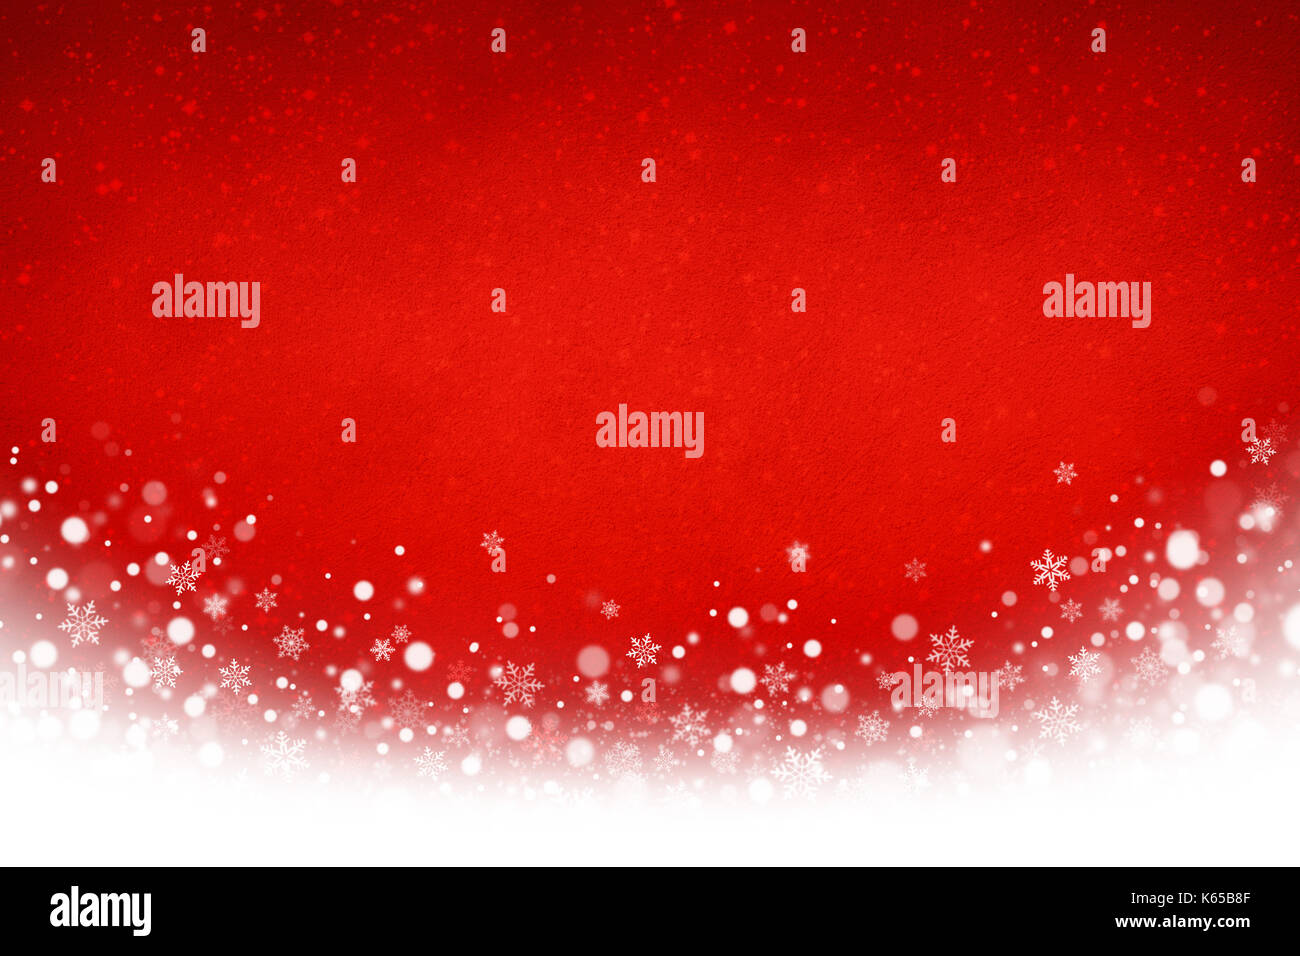 Festive red Christmas and white snowflakes background Stock Photo